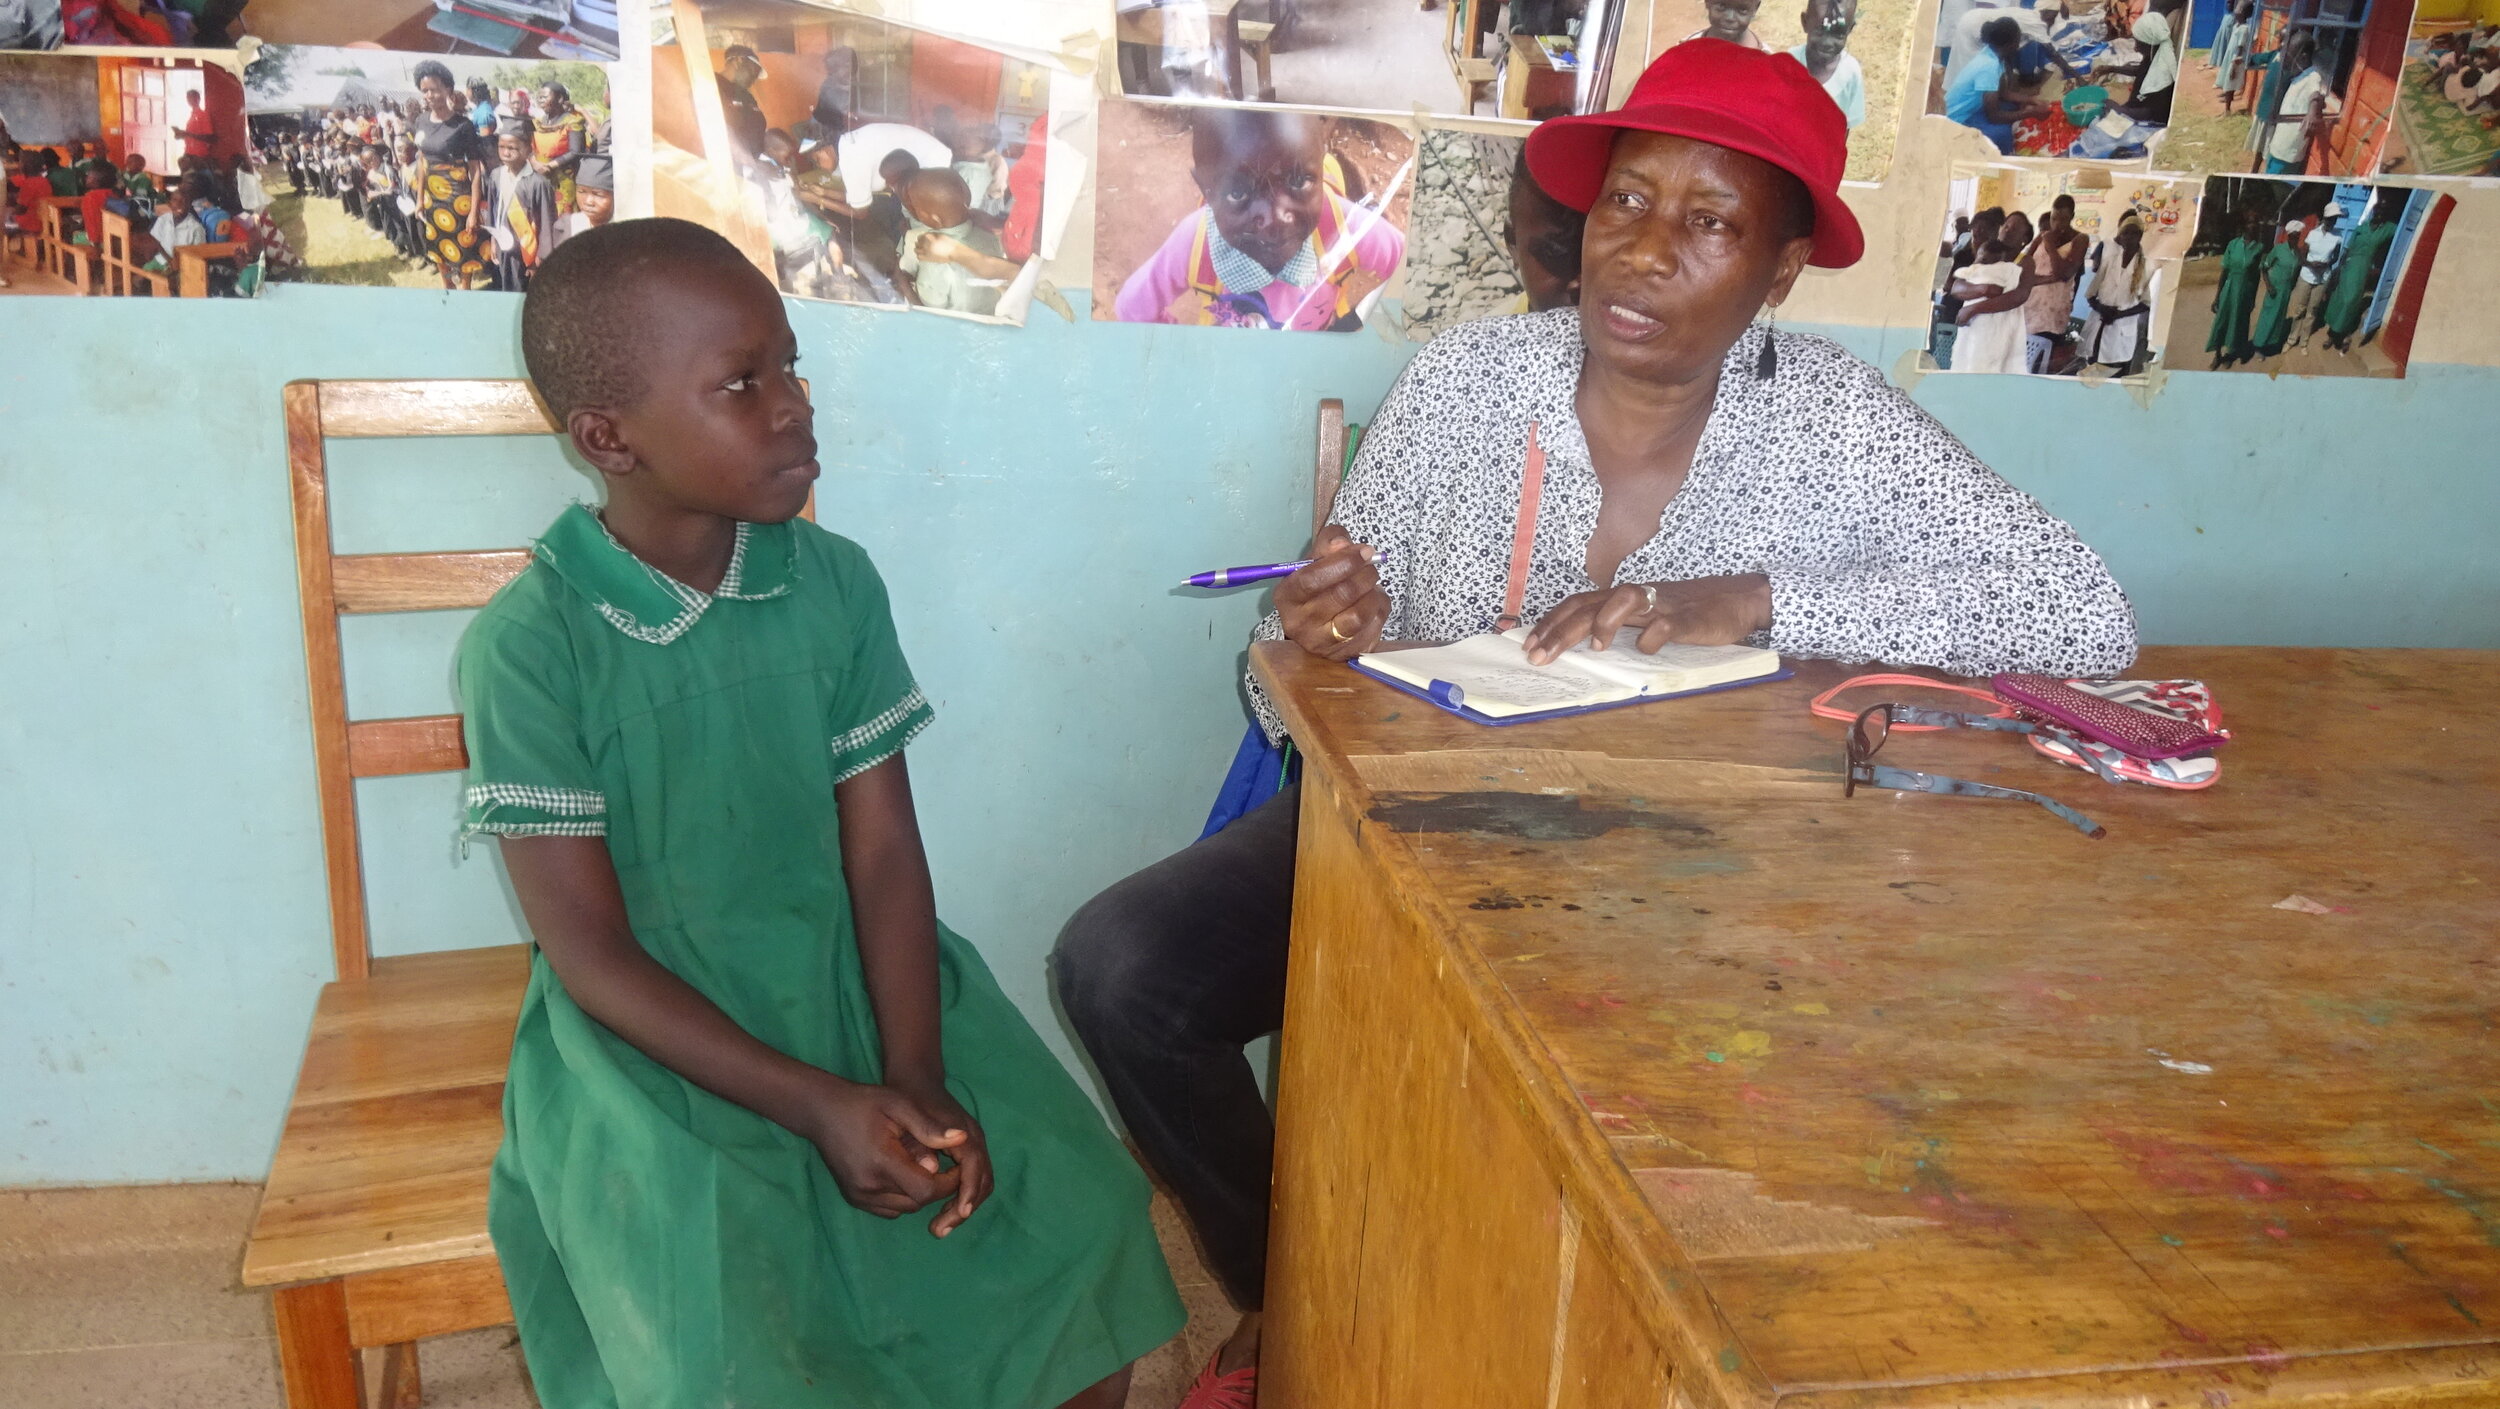 Mwanzo’s Executive Director, Loyce Ong’udi is seated at a table in a school classroom